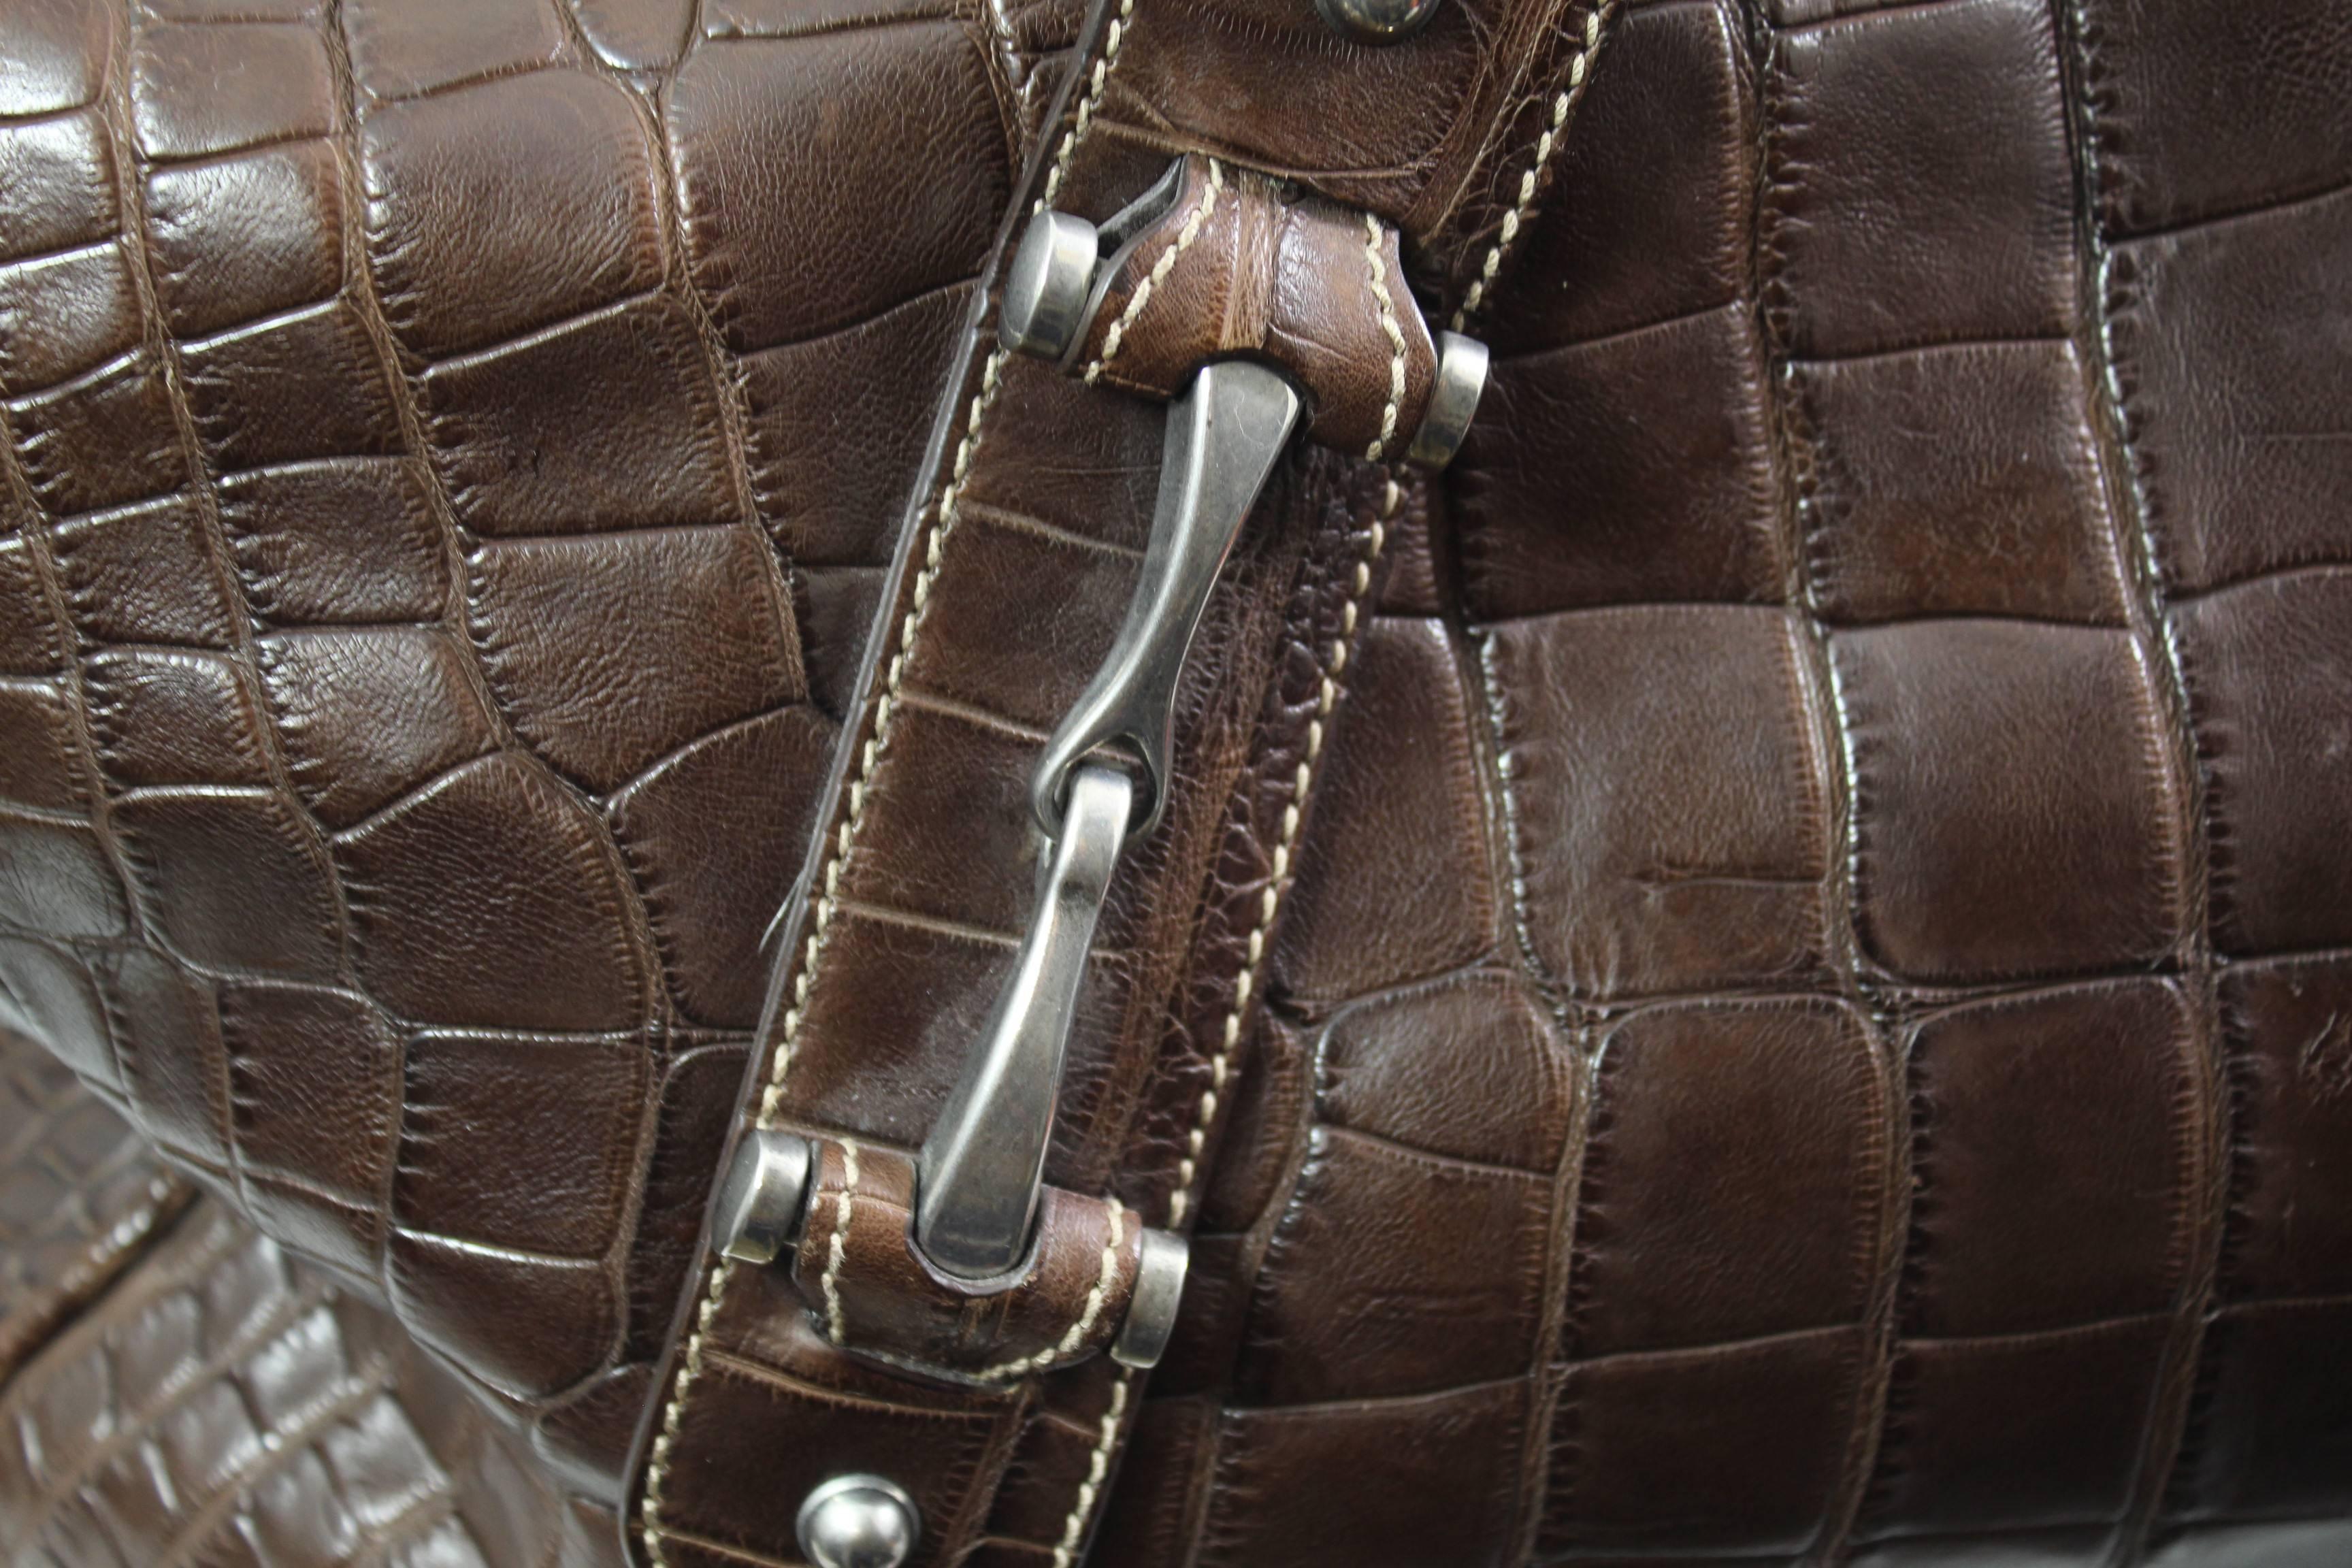 Amazing Gucci's men travel bag in crocodile Cocco Nappato (Louisiana crocodile). No CITES or invoece so please make ssure about customs in your country regarding exotics skins.
Steel hardware
Linining in canvas ( initialss engraved in an